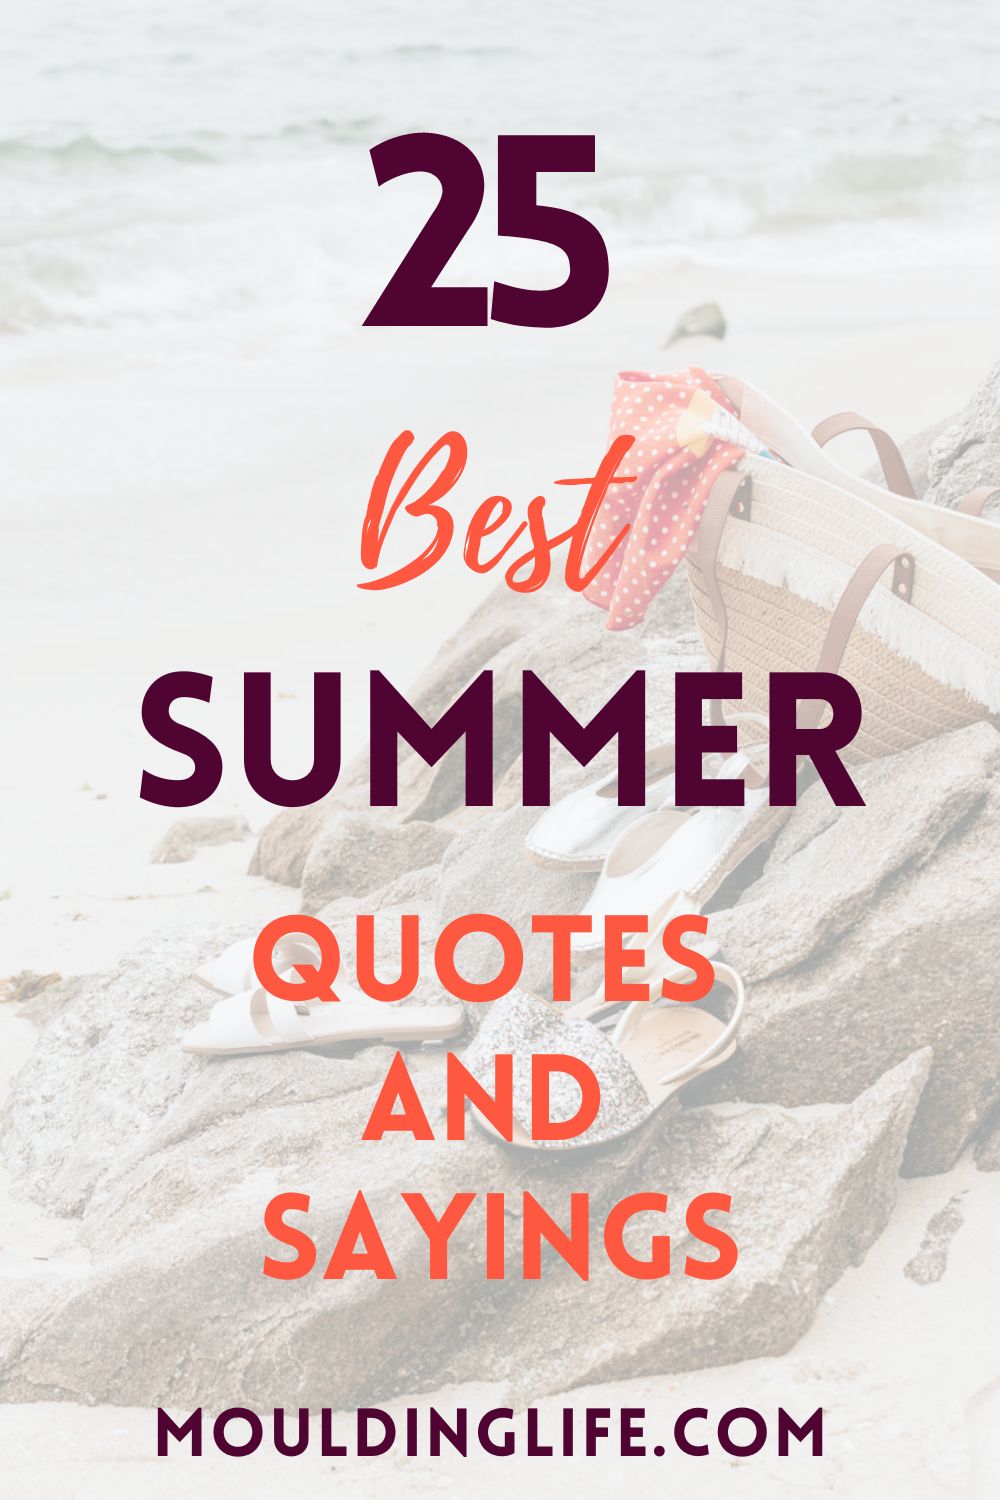 25 Happy Summer Quotes - Moulding Life